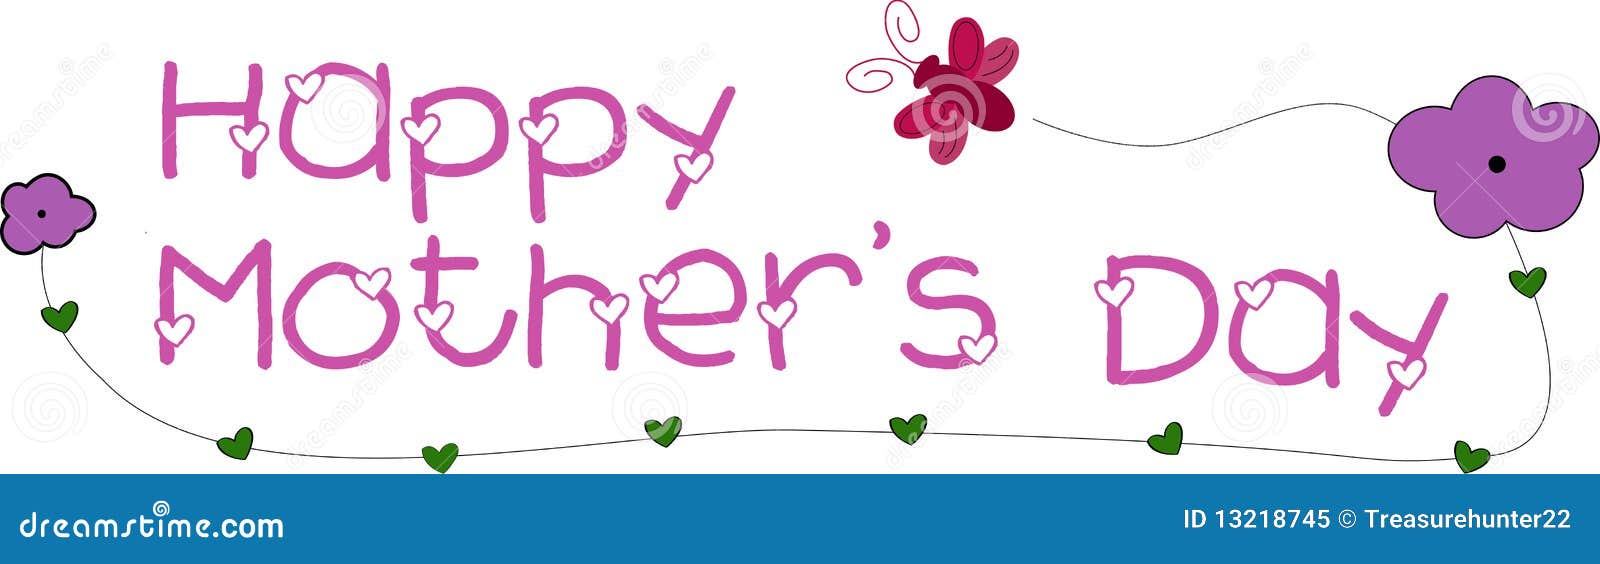 free religious clip art for mother's day - photo #47